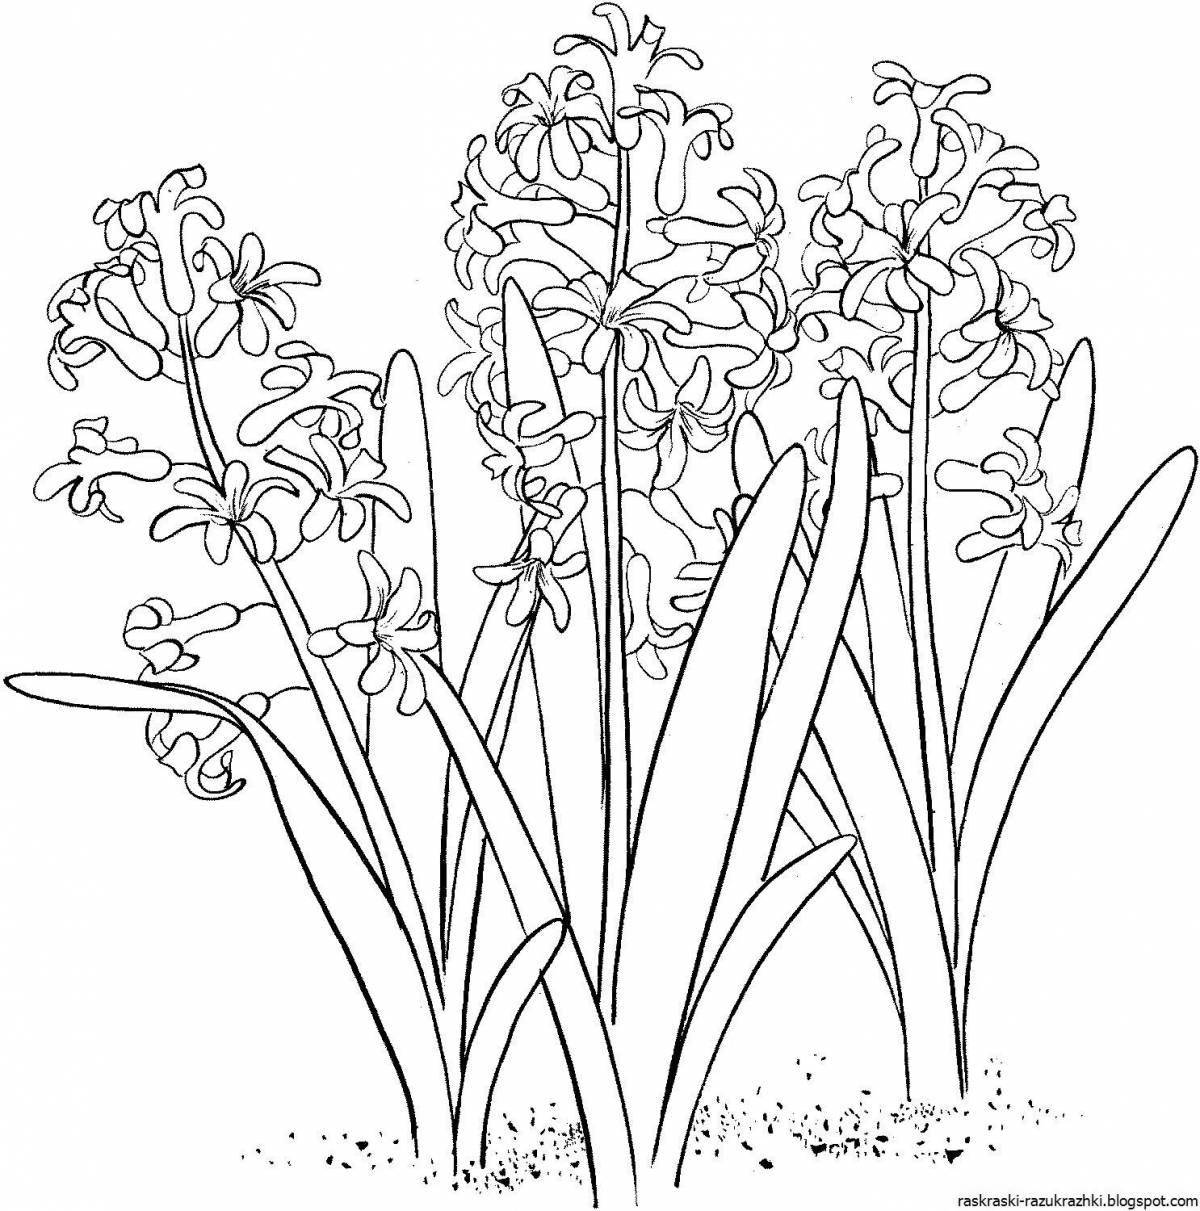 Incredible plant coloring book for kids